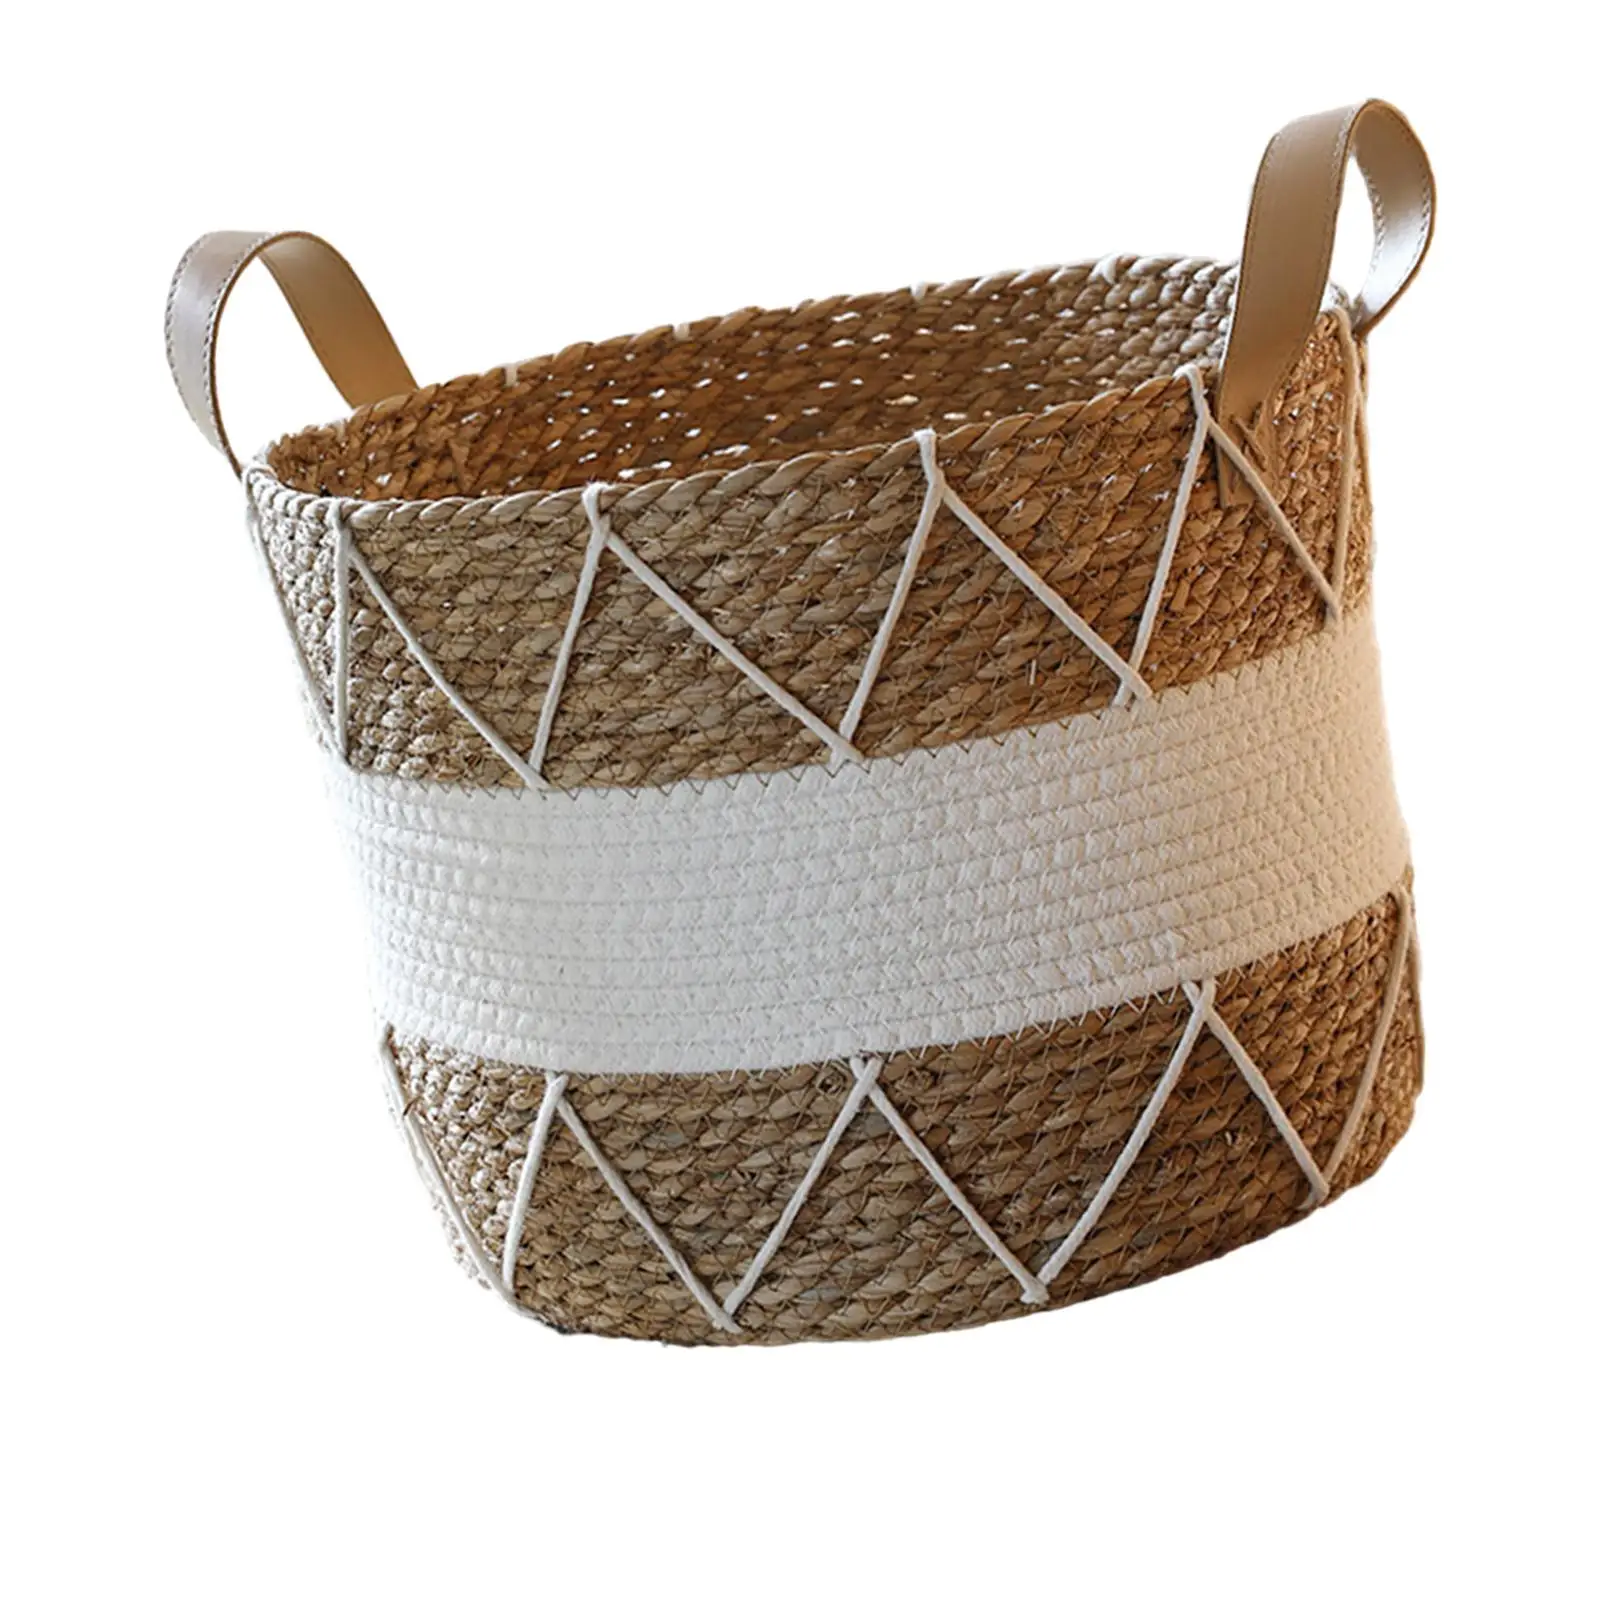 Dirty Clothes Laundry Basket with Handles Portable Nordic Woven Rope Storage Basket for Toiletry Socks Closet Shoes Clothing